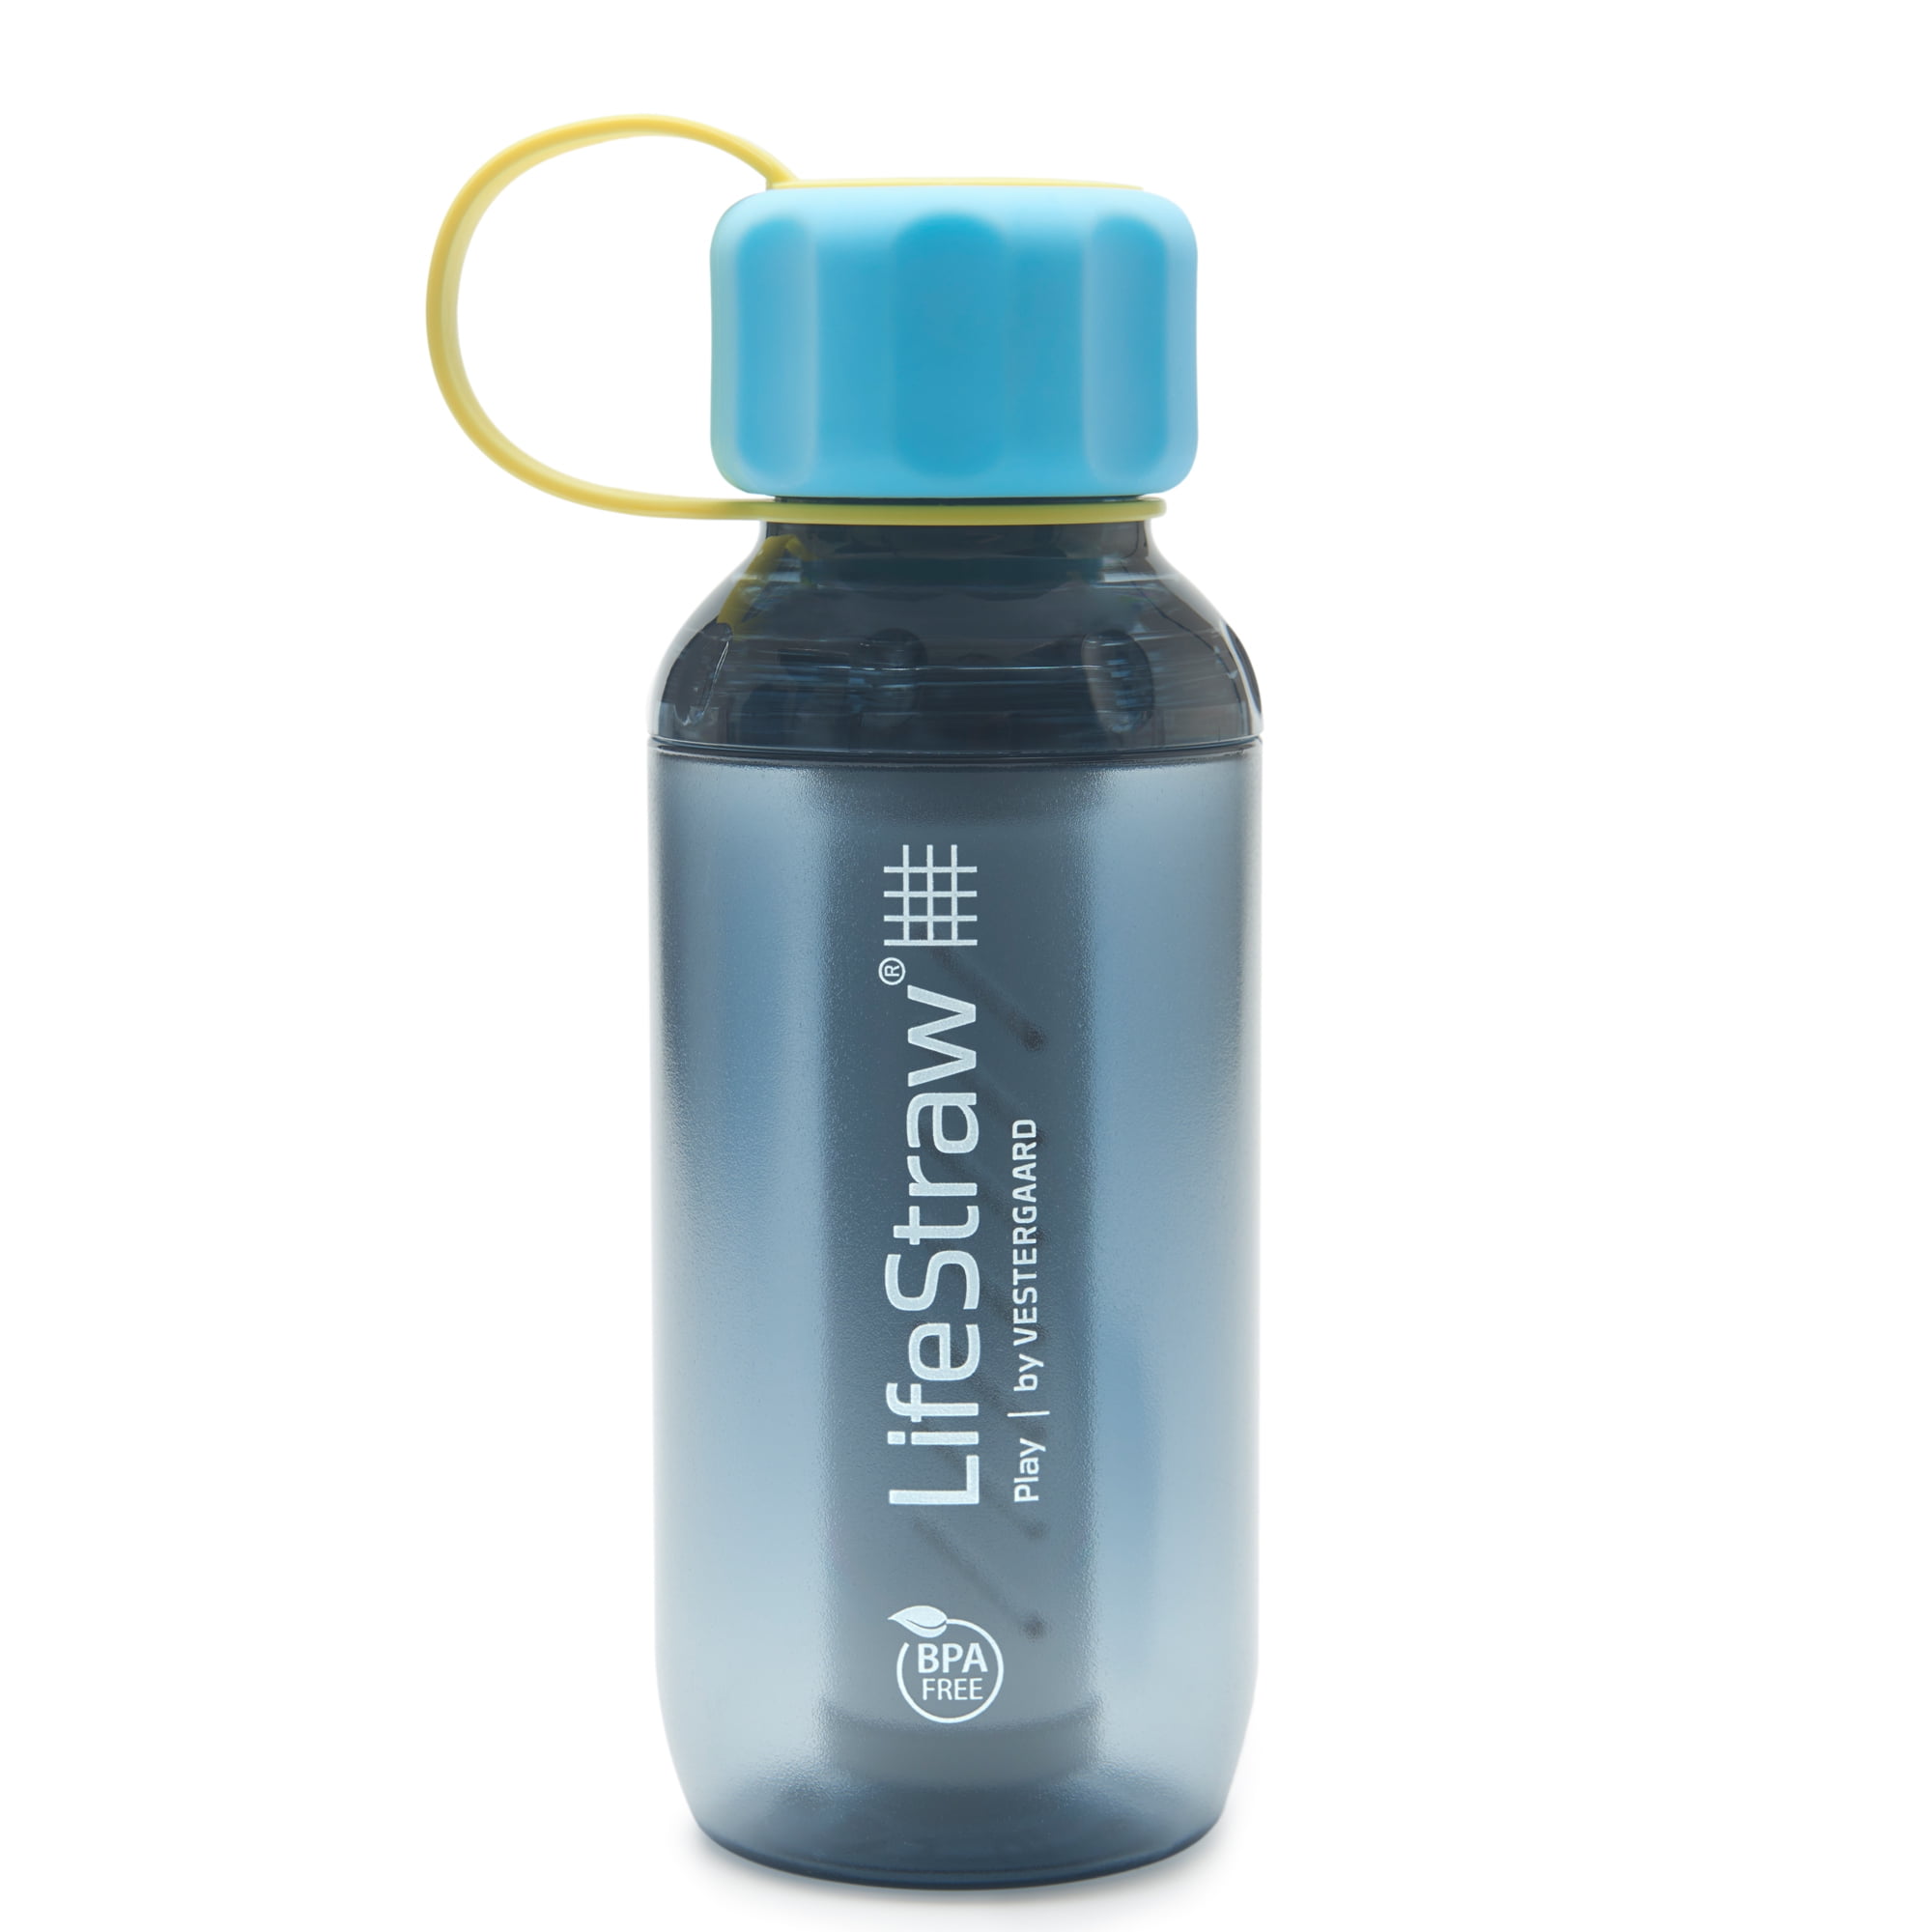 2 Pack LIFESTRAW KID'S 10oz WATER BOTTLE with 2 STAGE FILTER BPA FREE LIFE STRAW